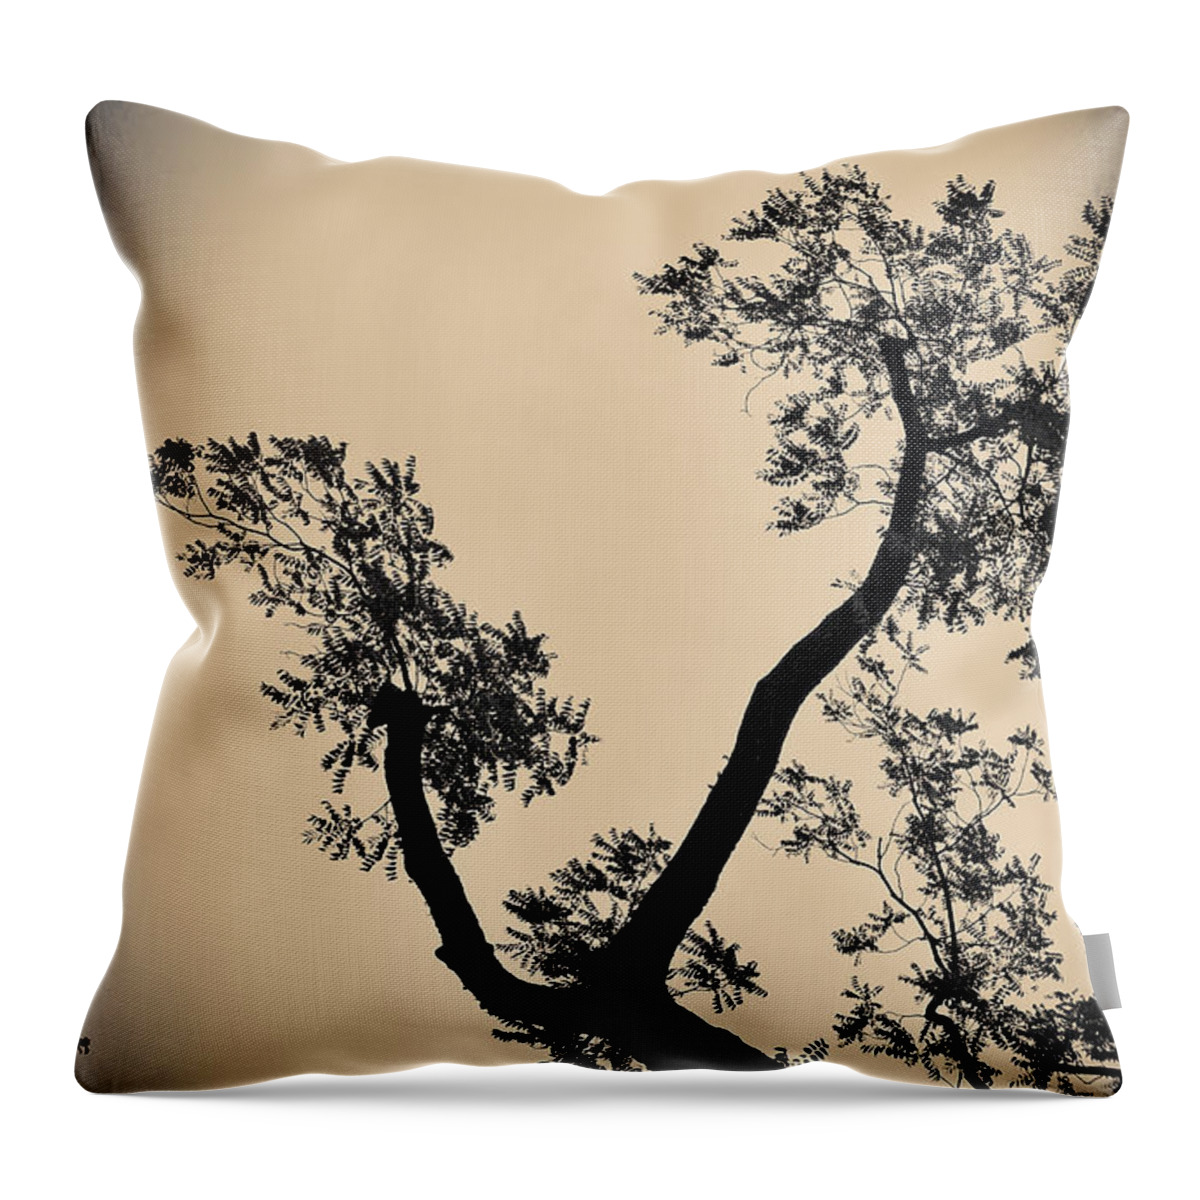 Landscapes Throw Pillow featuring the photograph No Title 2 #1 by Gerlinde Keating